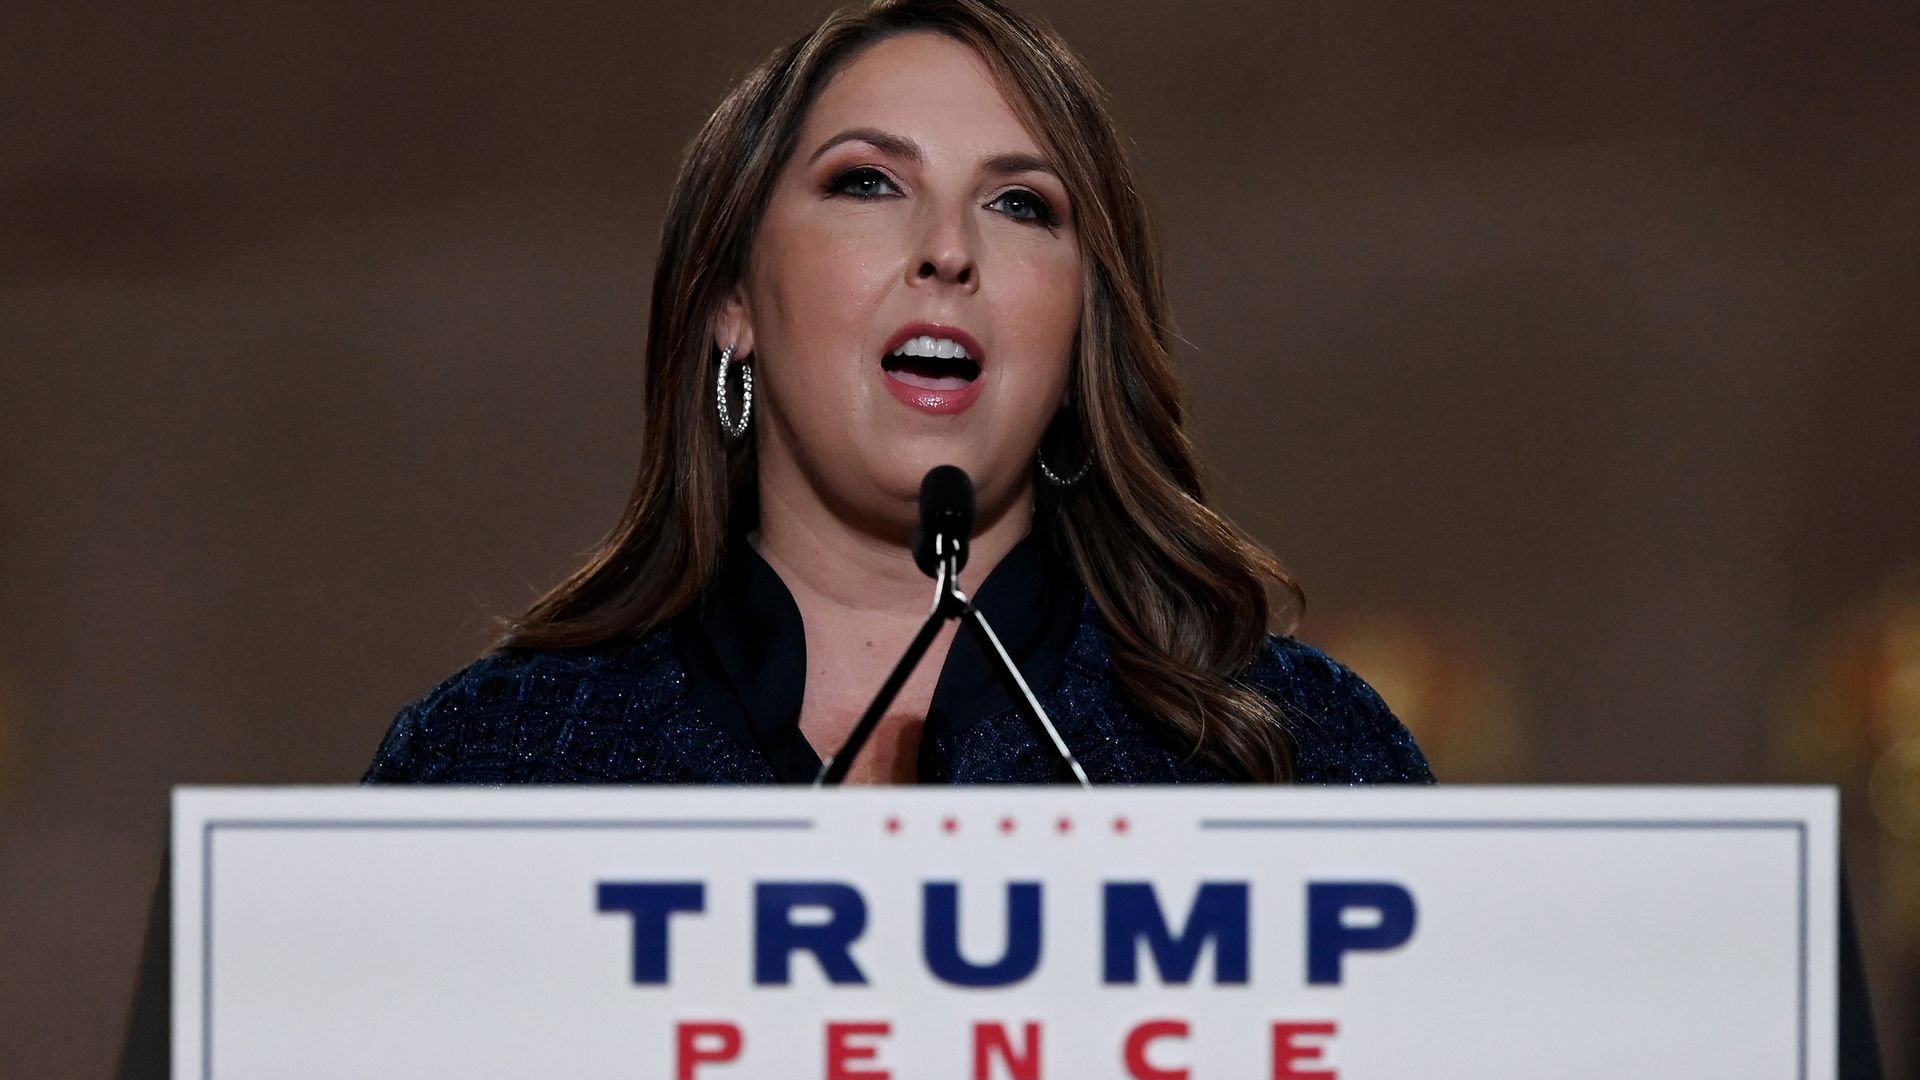 Ronna McDaniel speaks in front of a microphone